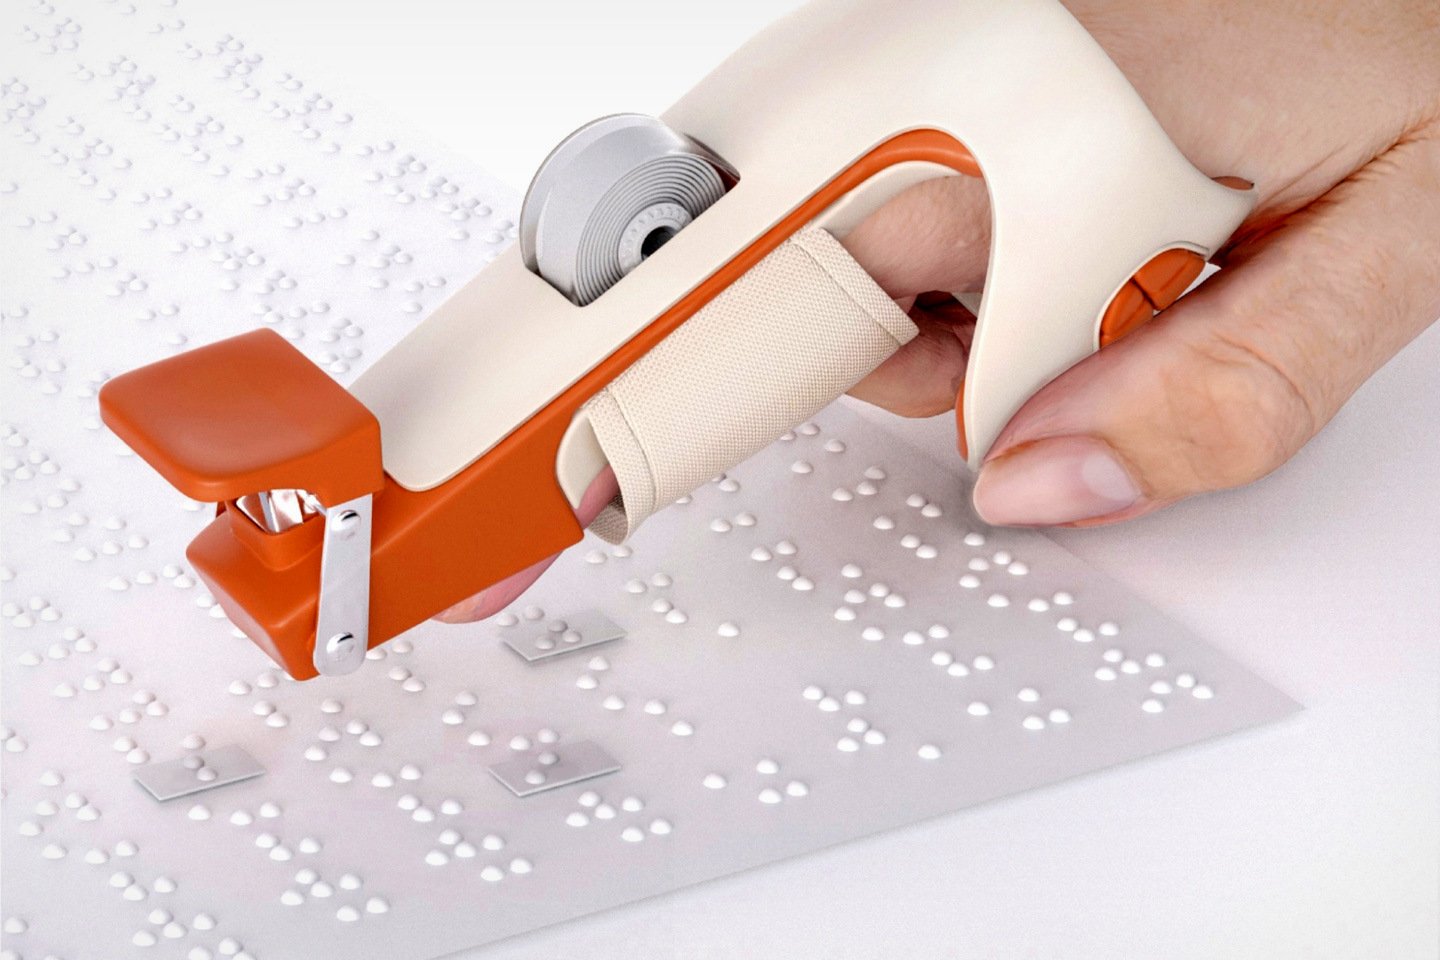 #This wearable tape-dispenser can help correct Braille typos and misprints